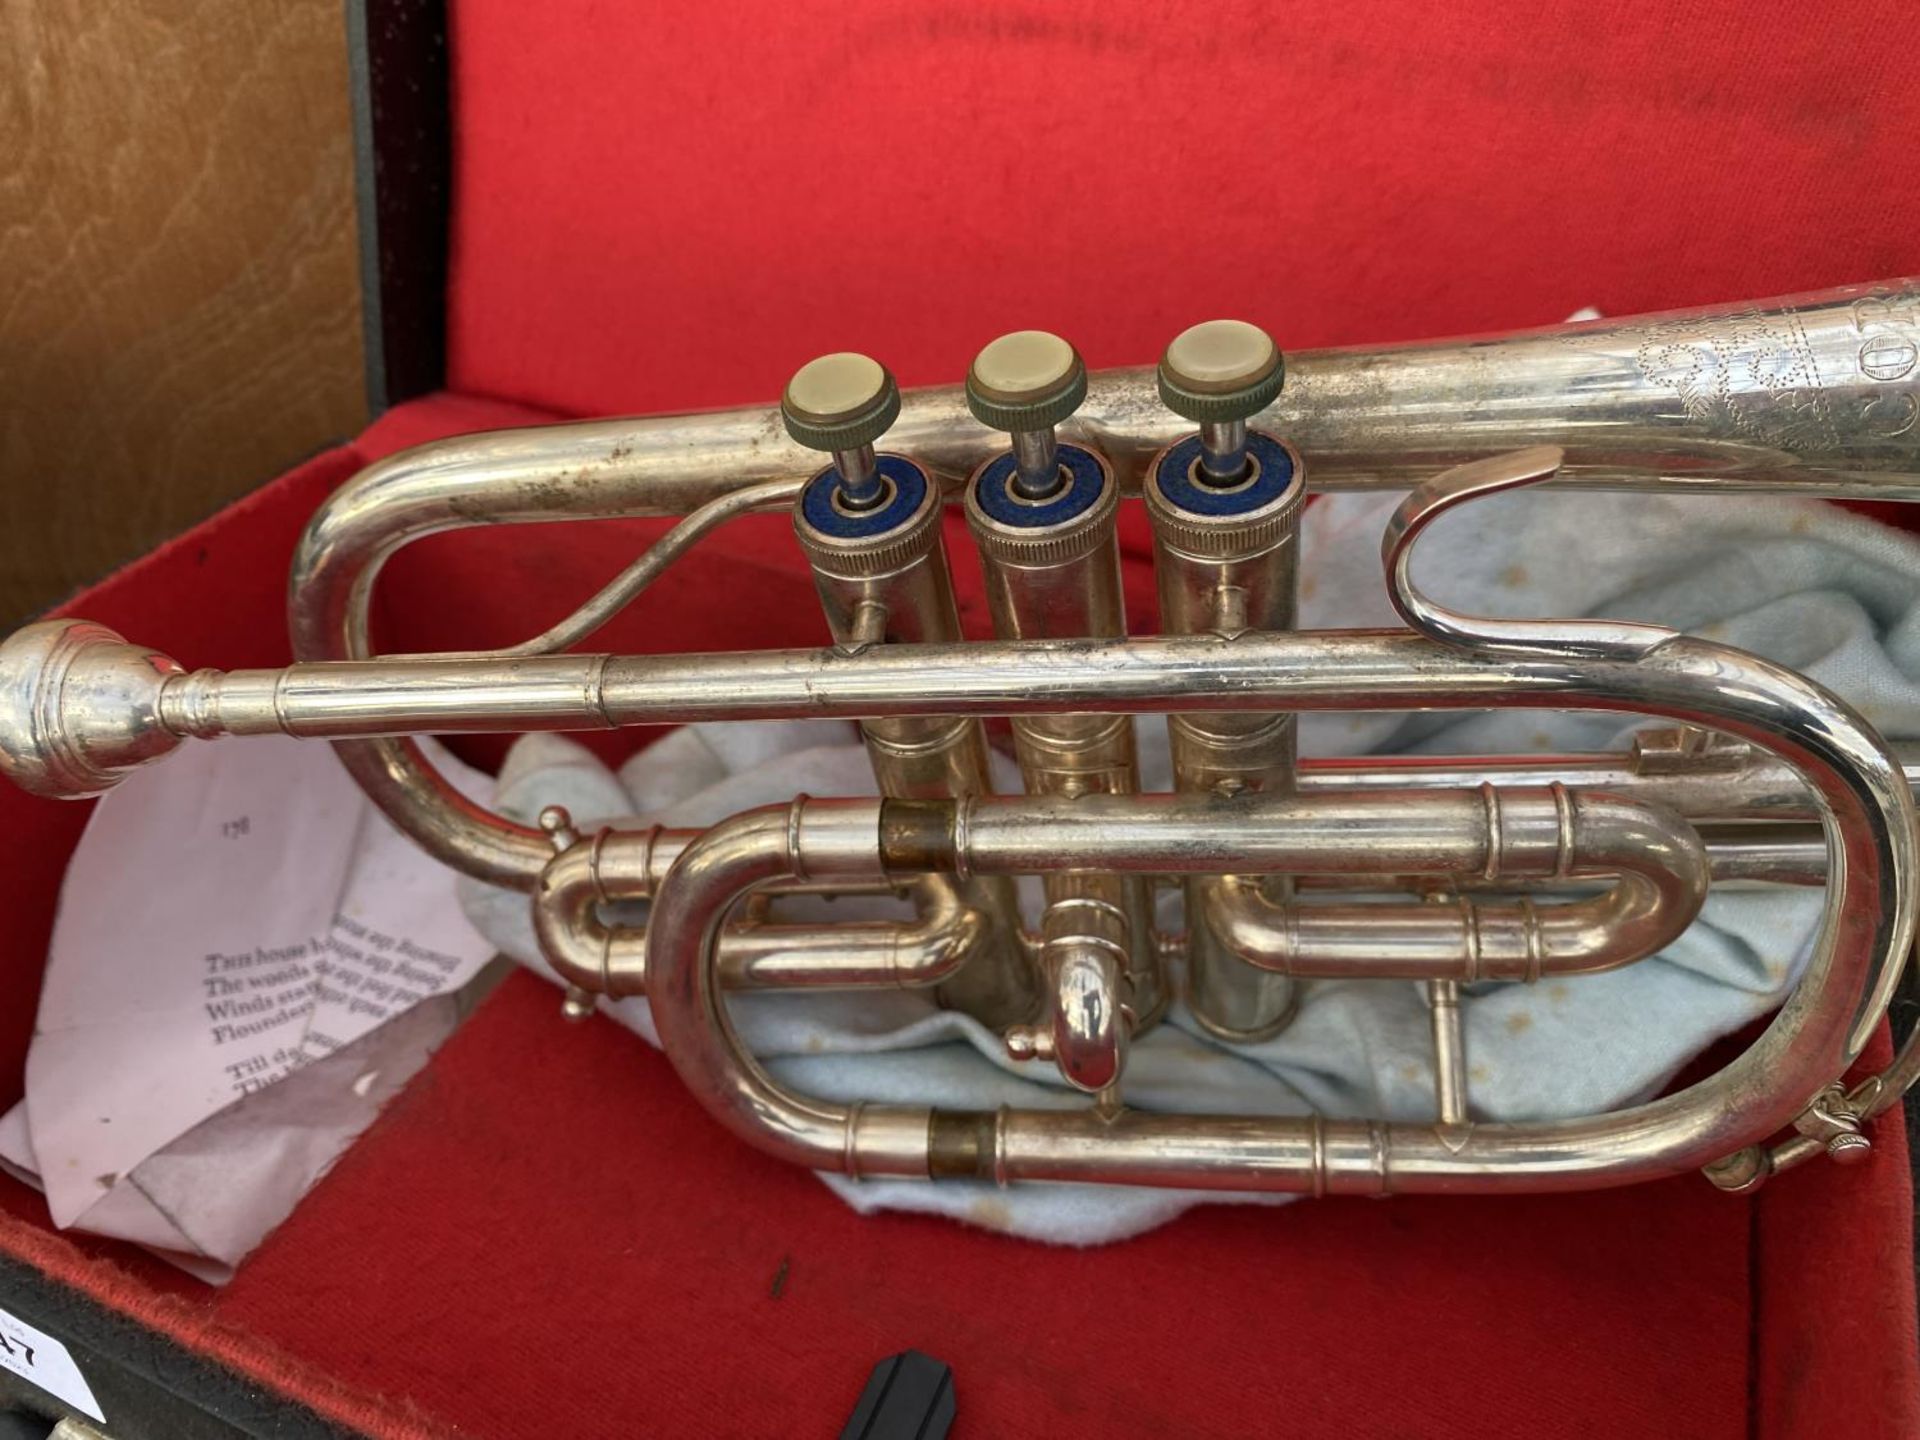 A CASED TRUMPET BEARING THE STAMP 'CORTON' - Image 3 of 3